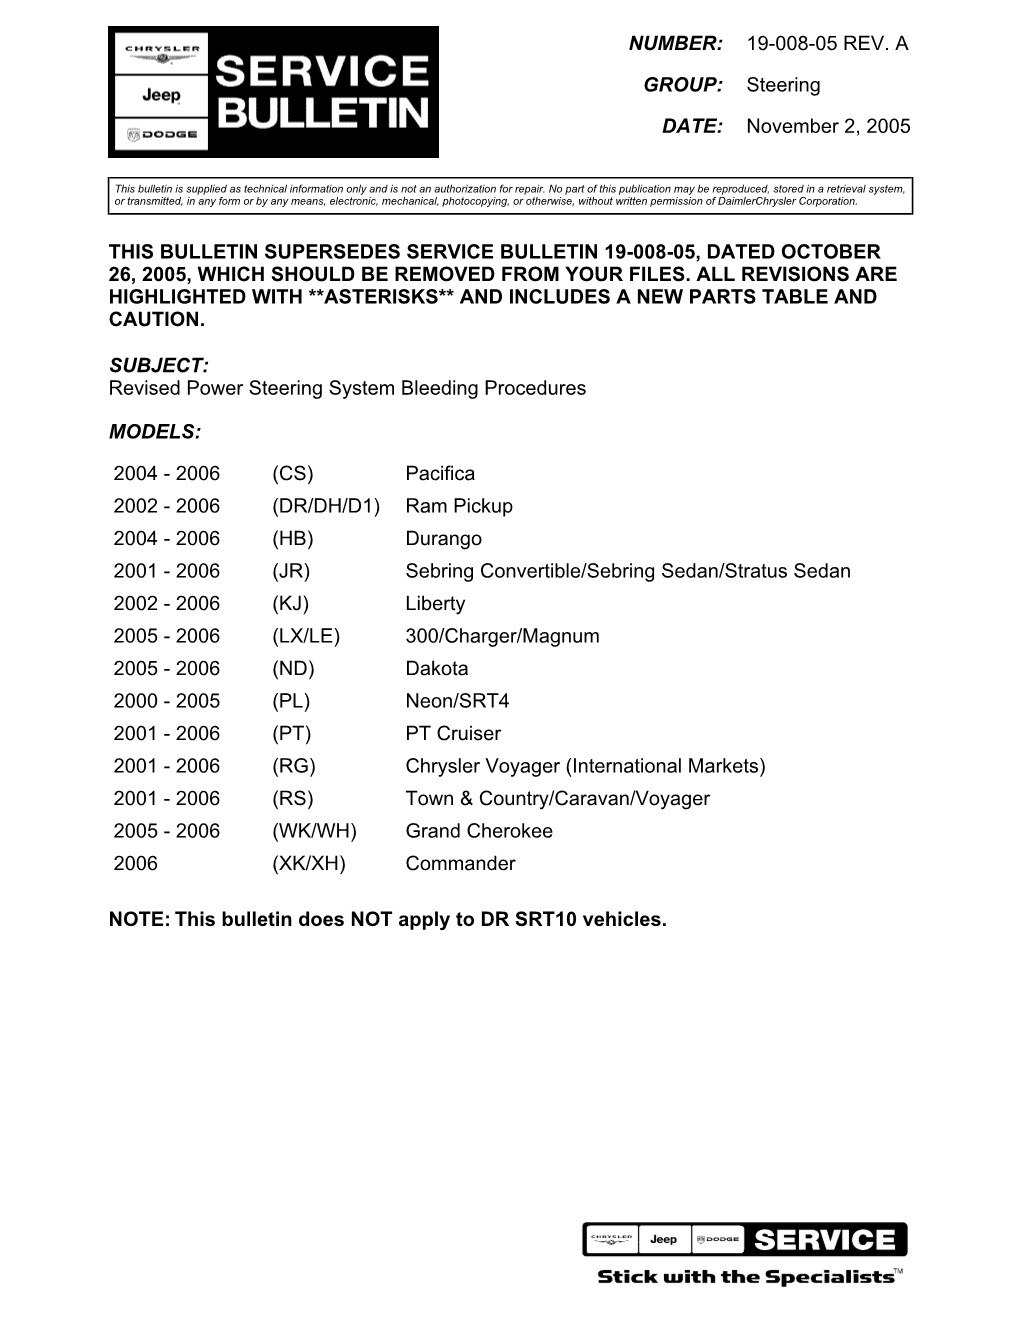 This Bulletin Supersedes Service Bulletin 19-008-05, Dated October 26, 2005, Which Should Be Removed from Your Files